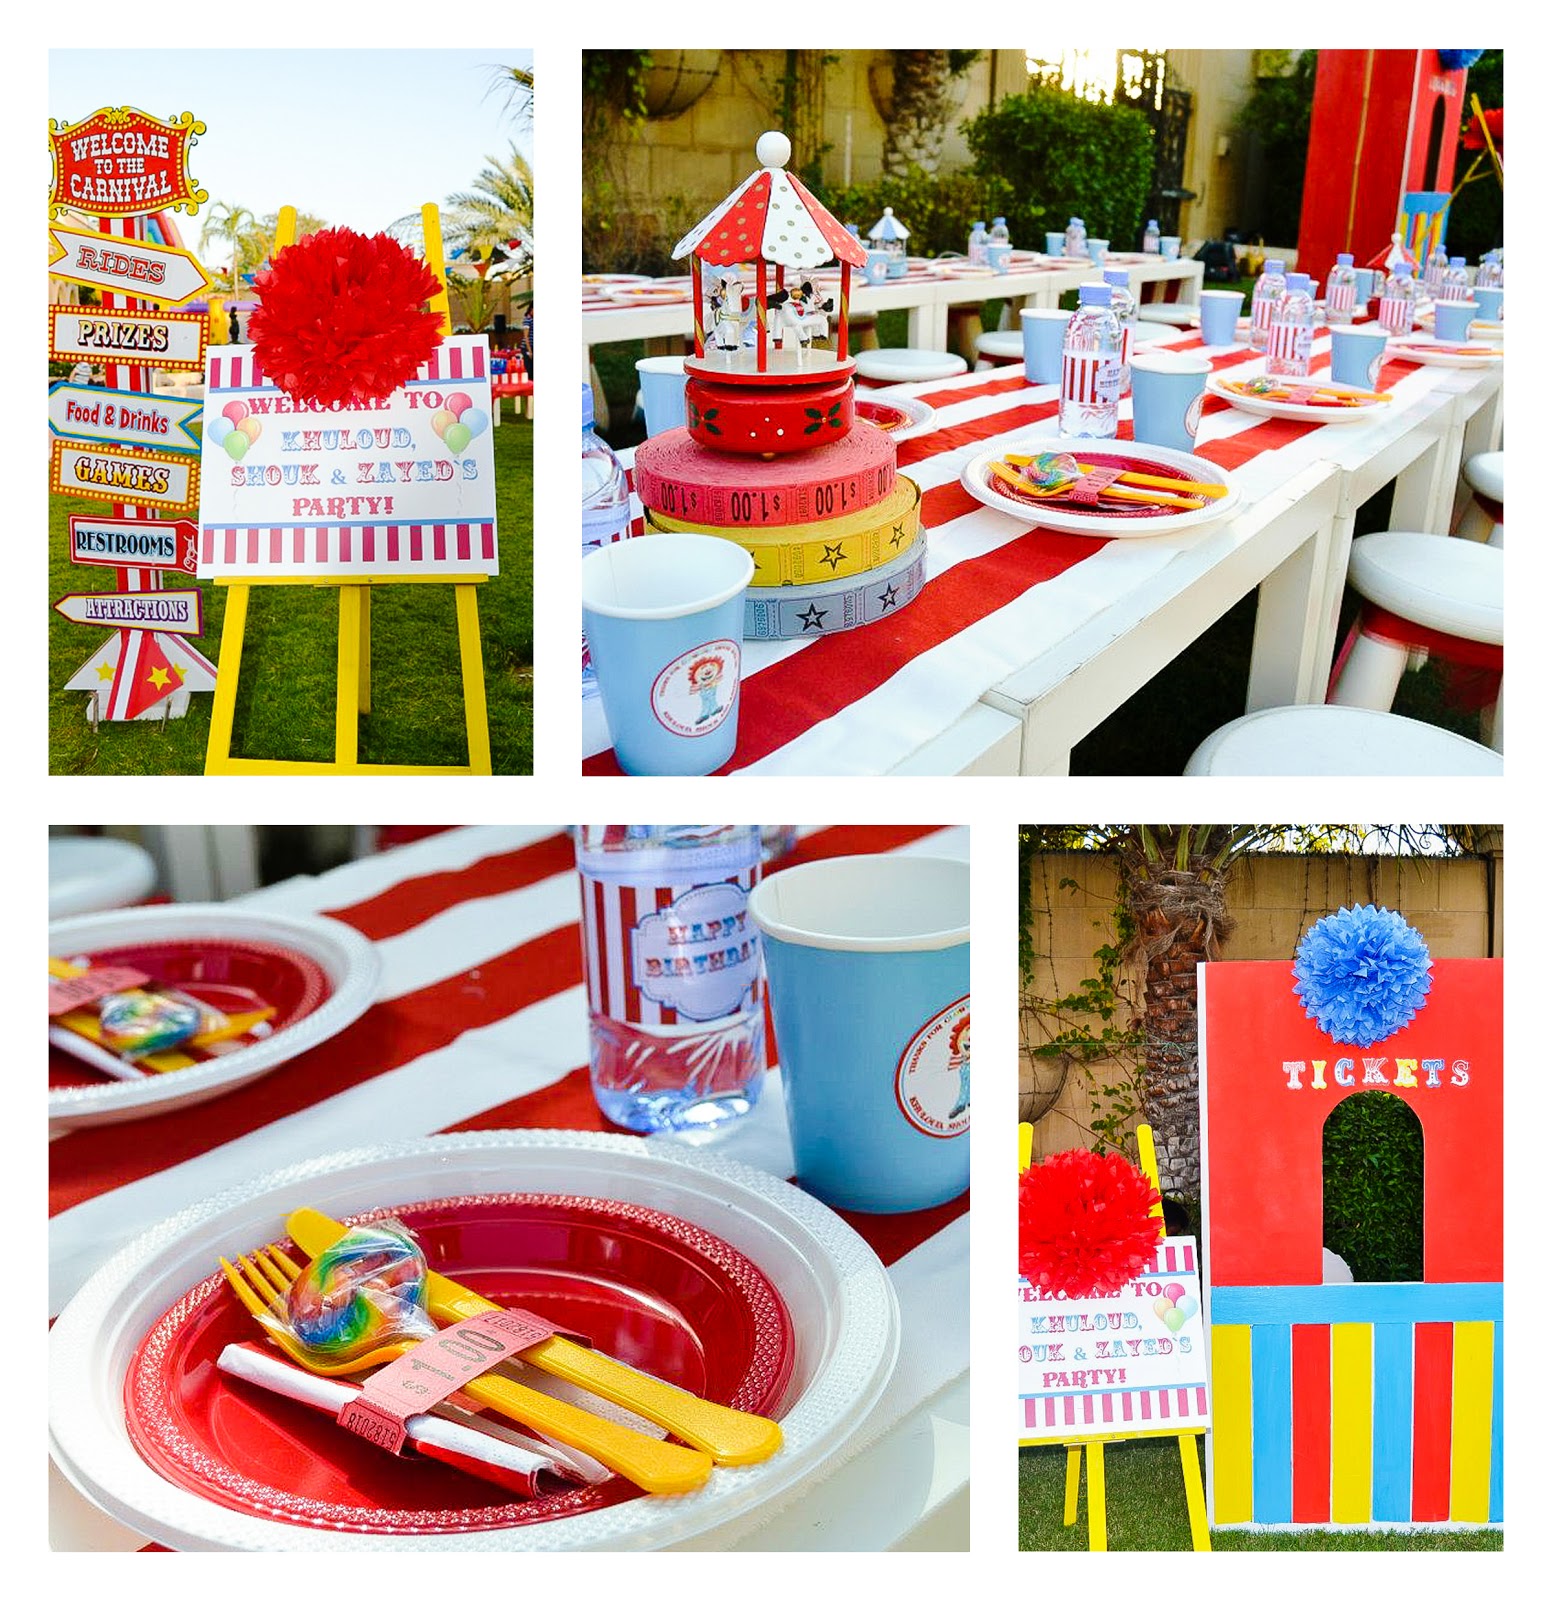 Carnival party | Carnival party, Carnival birthday, Party themes